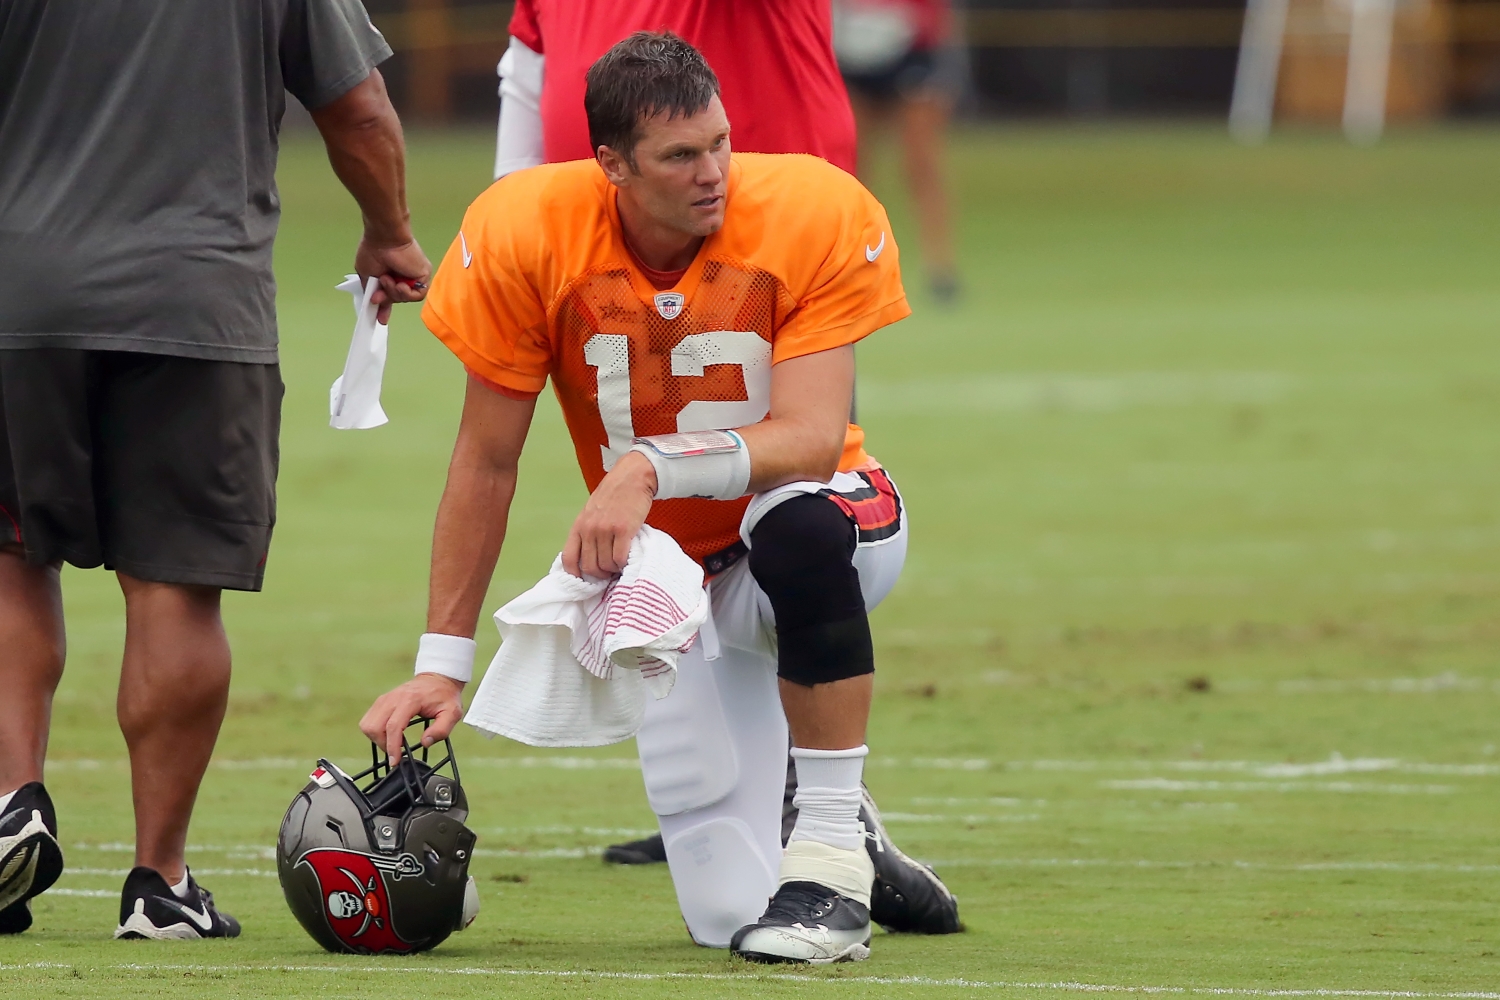 Tampa Bay Buccaneers quarterback Tom Brady takes a knee during training camp practice.